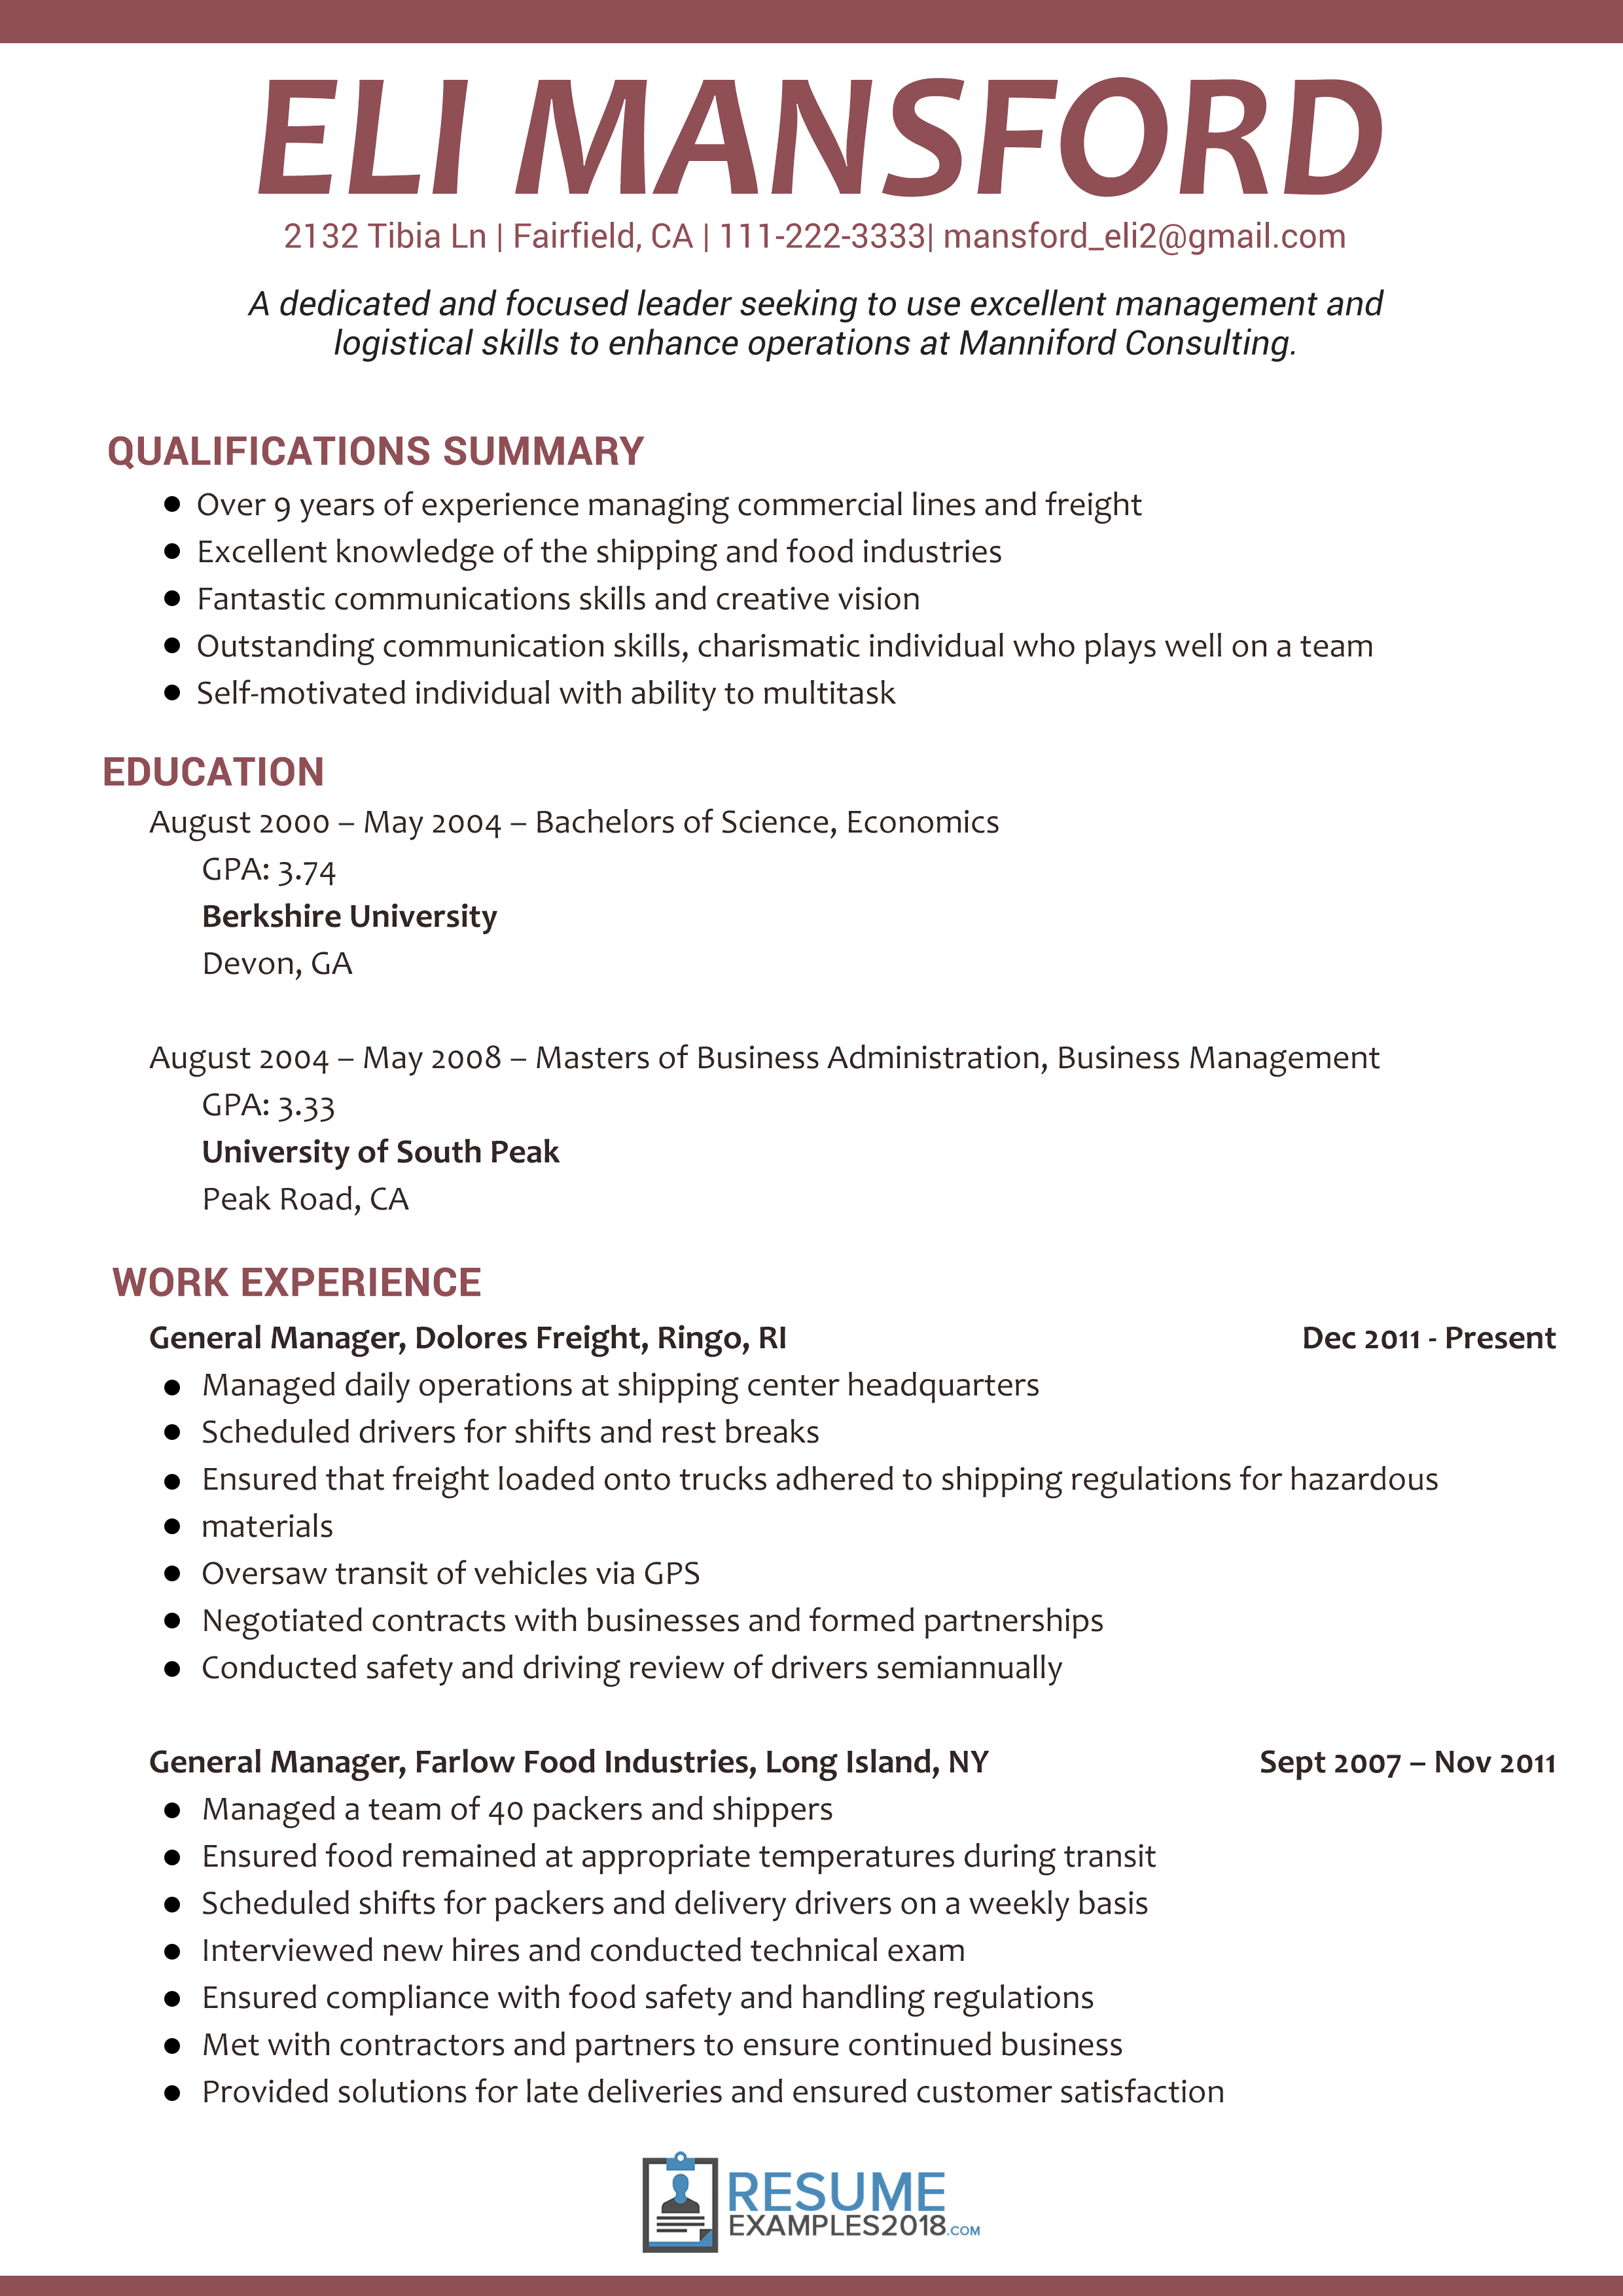 get better results with management resume examples 2018